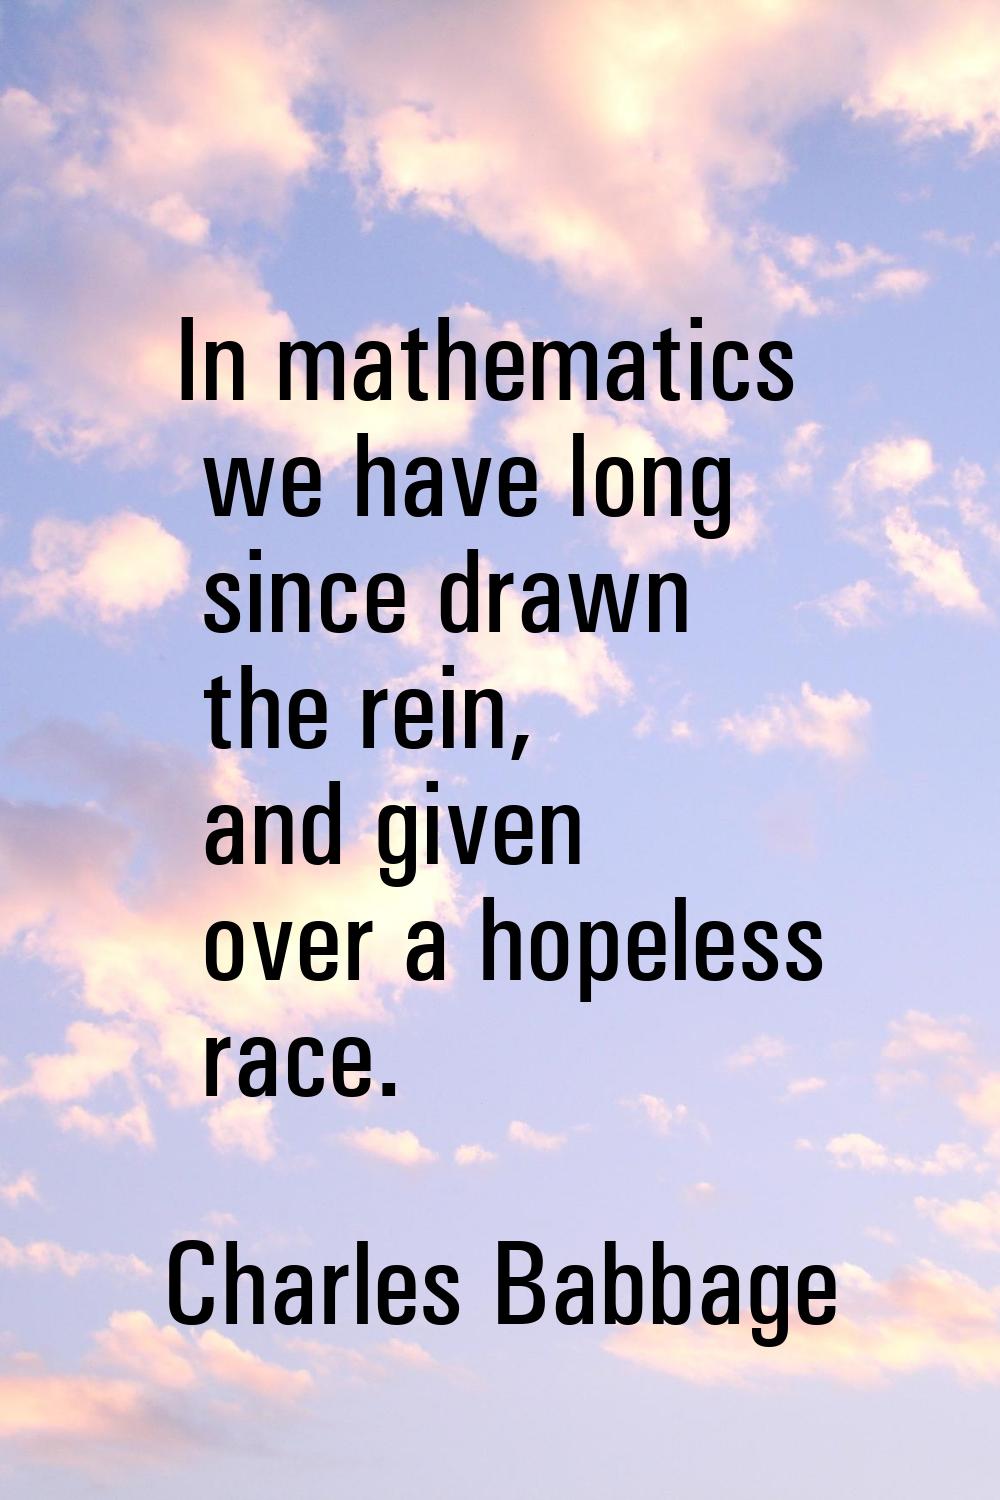 In mathematics we have long since drawn the rein, and given over a hopeless race.